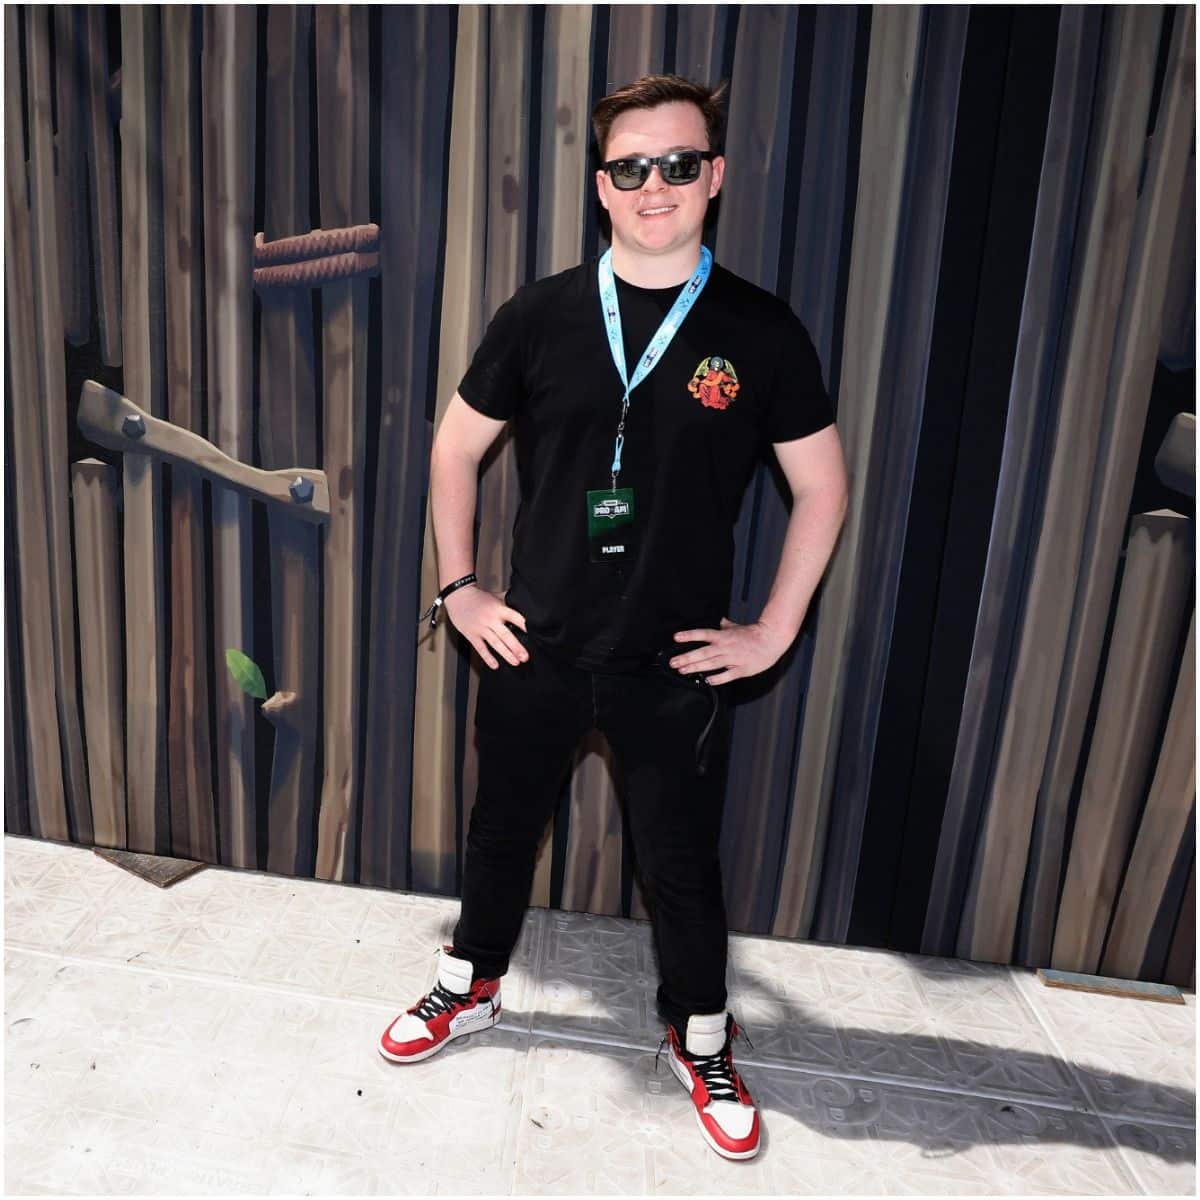 what is the net worth of Muselk